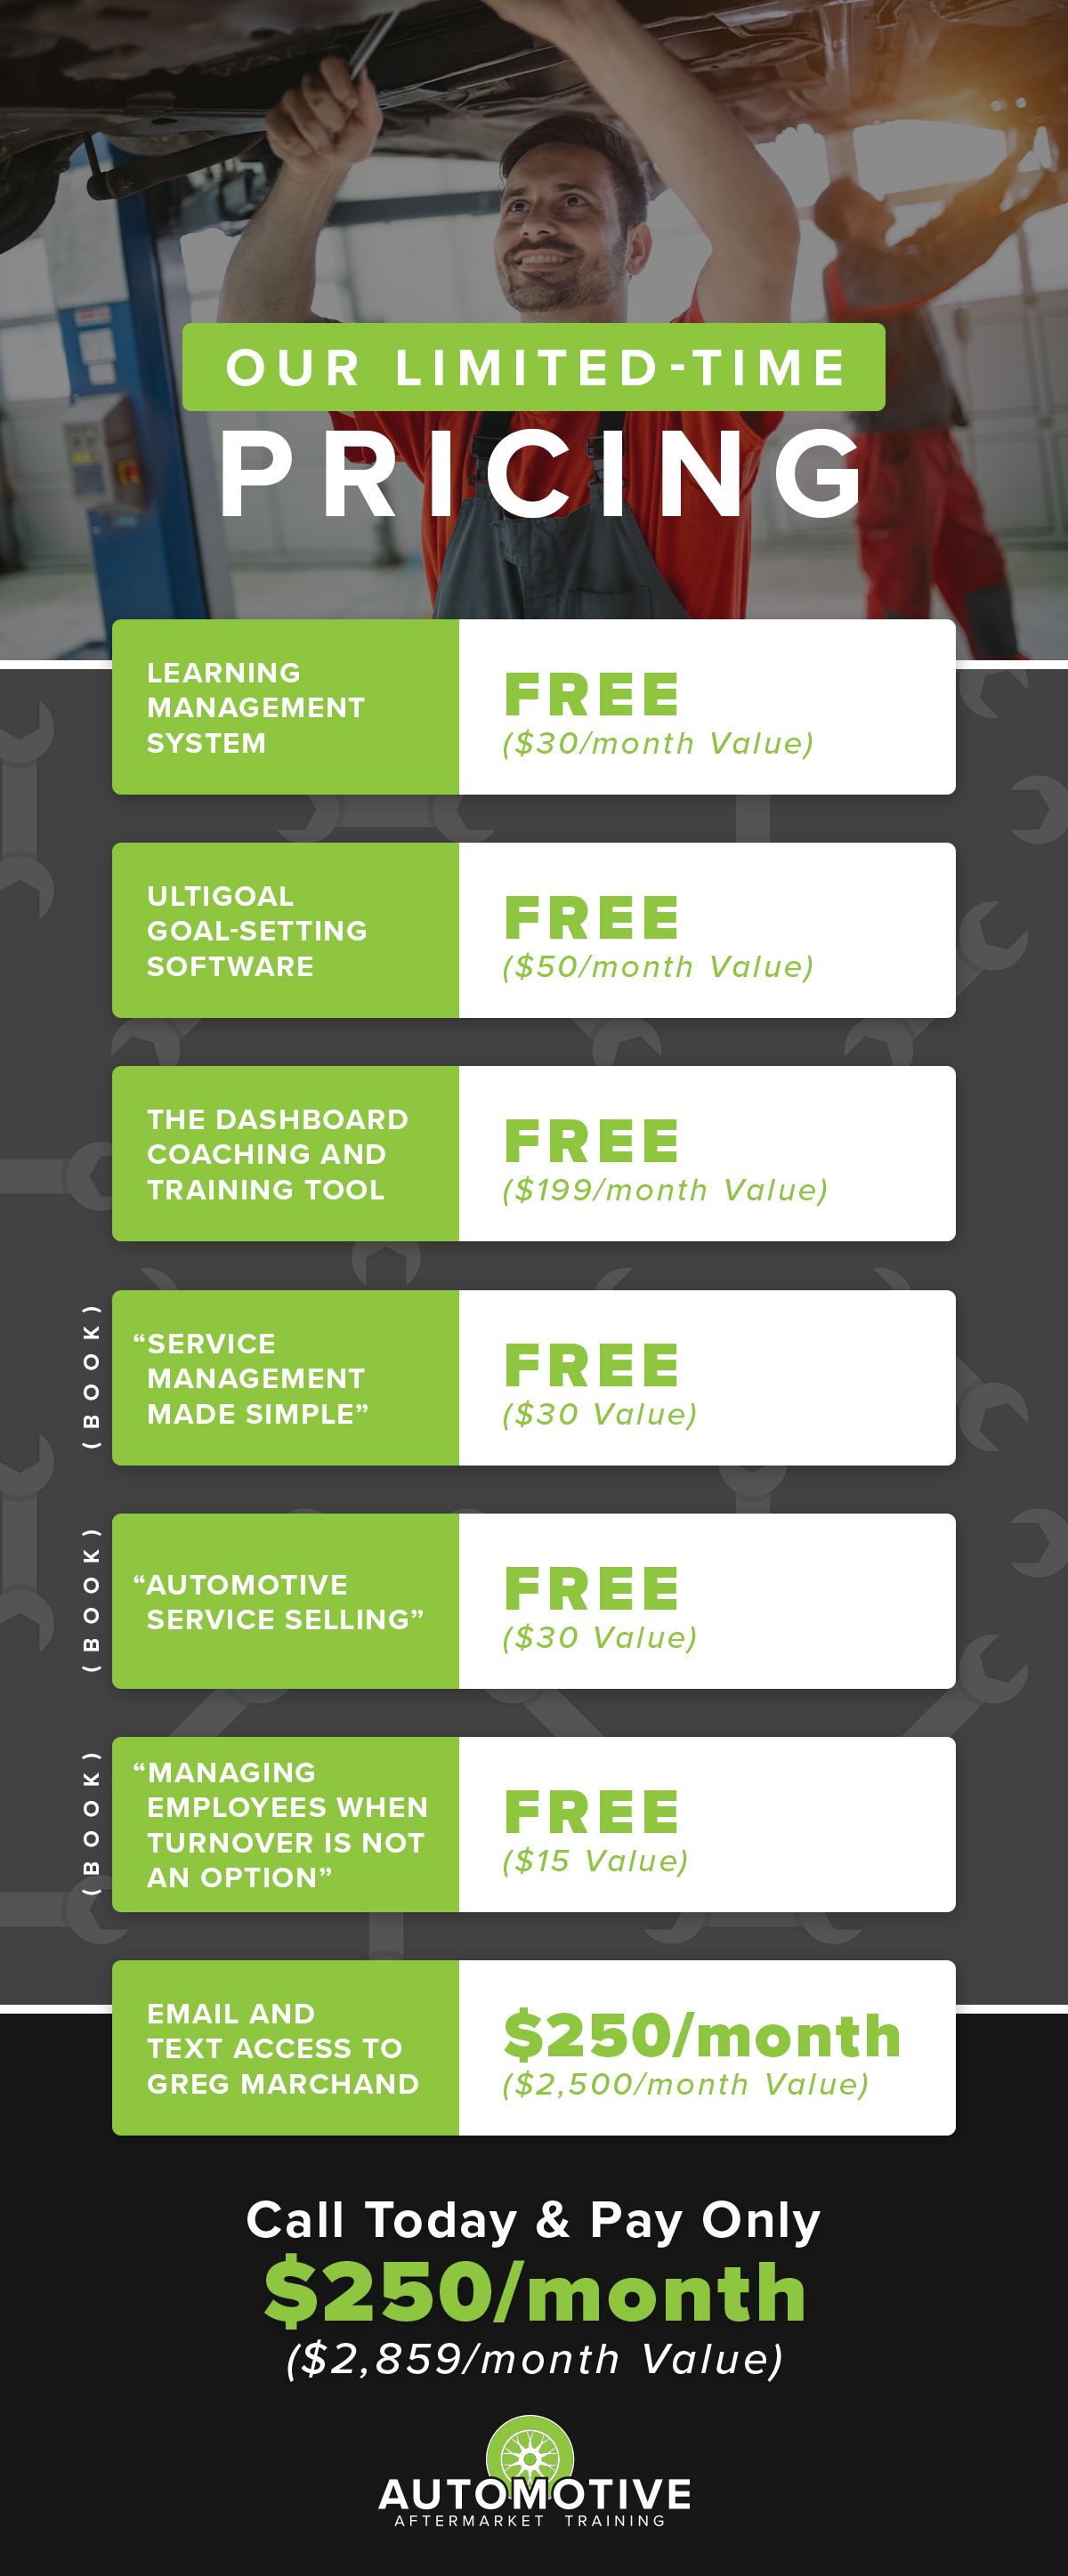 Infographic_Our Limited Time Pricing_Automotice Aftermarket Training_4.19.21.jpg